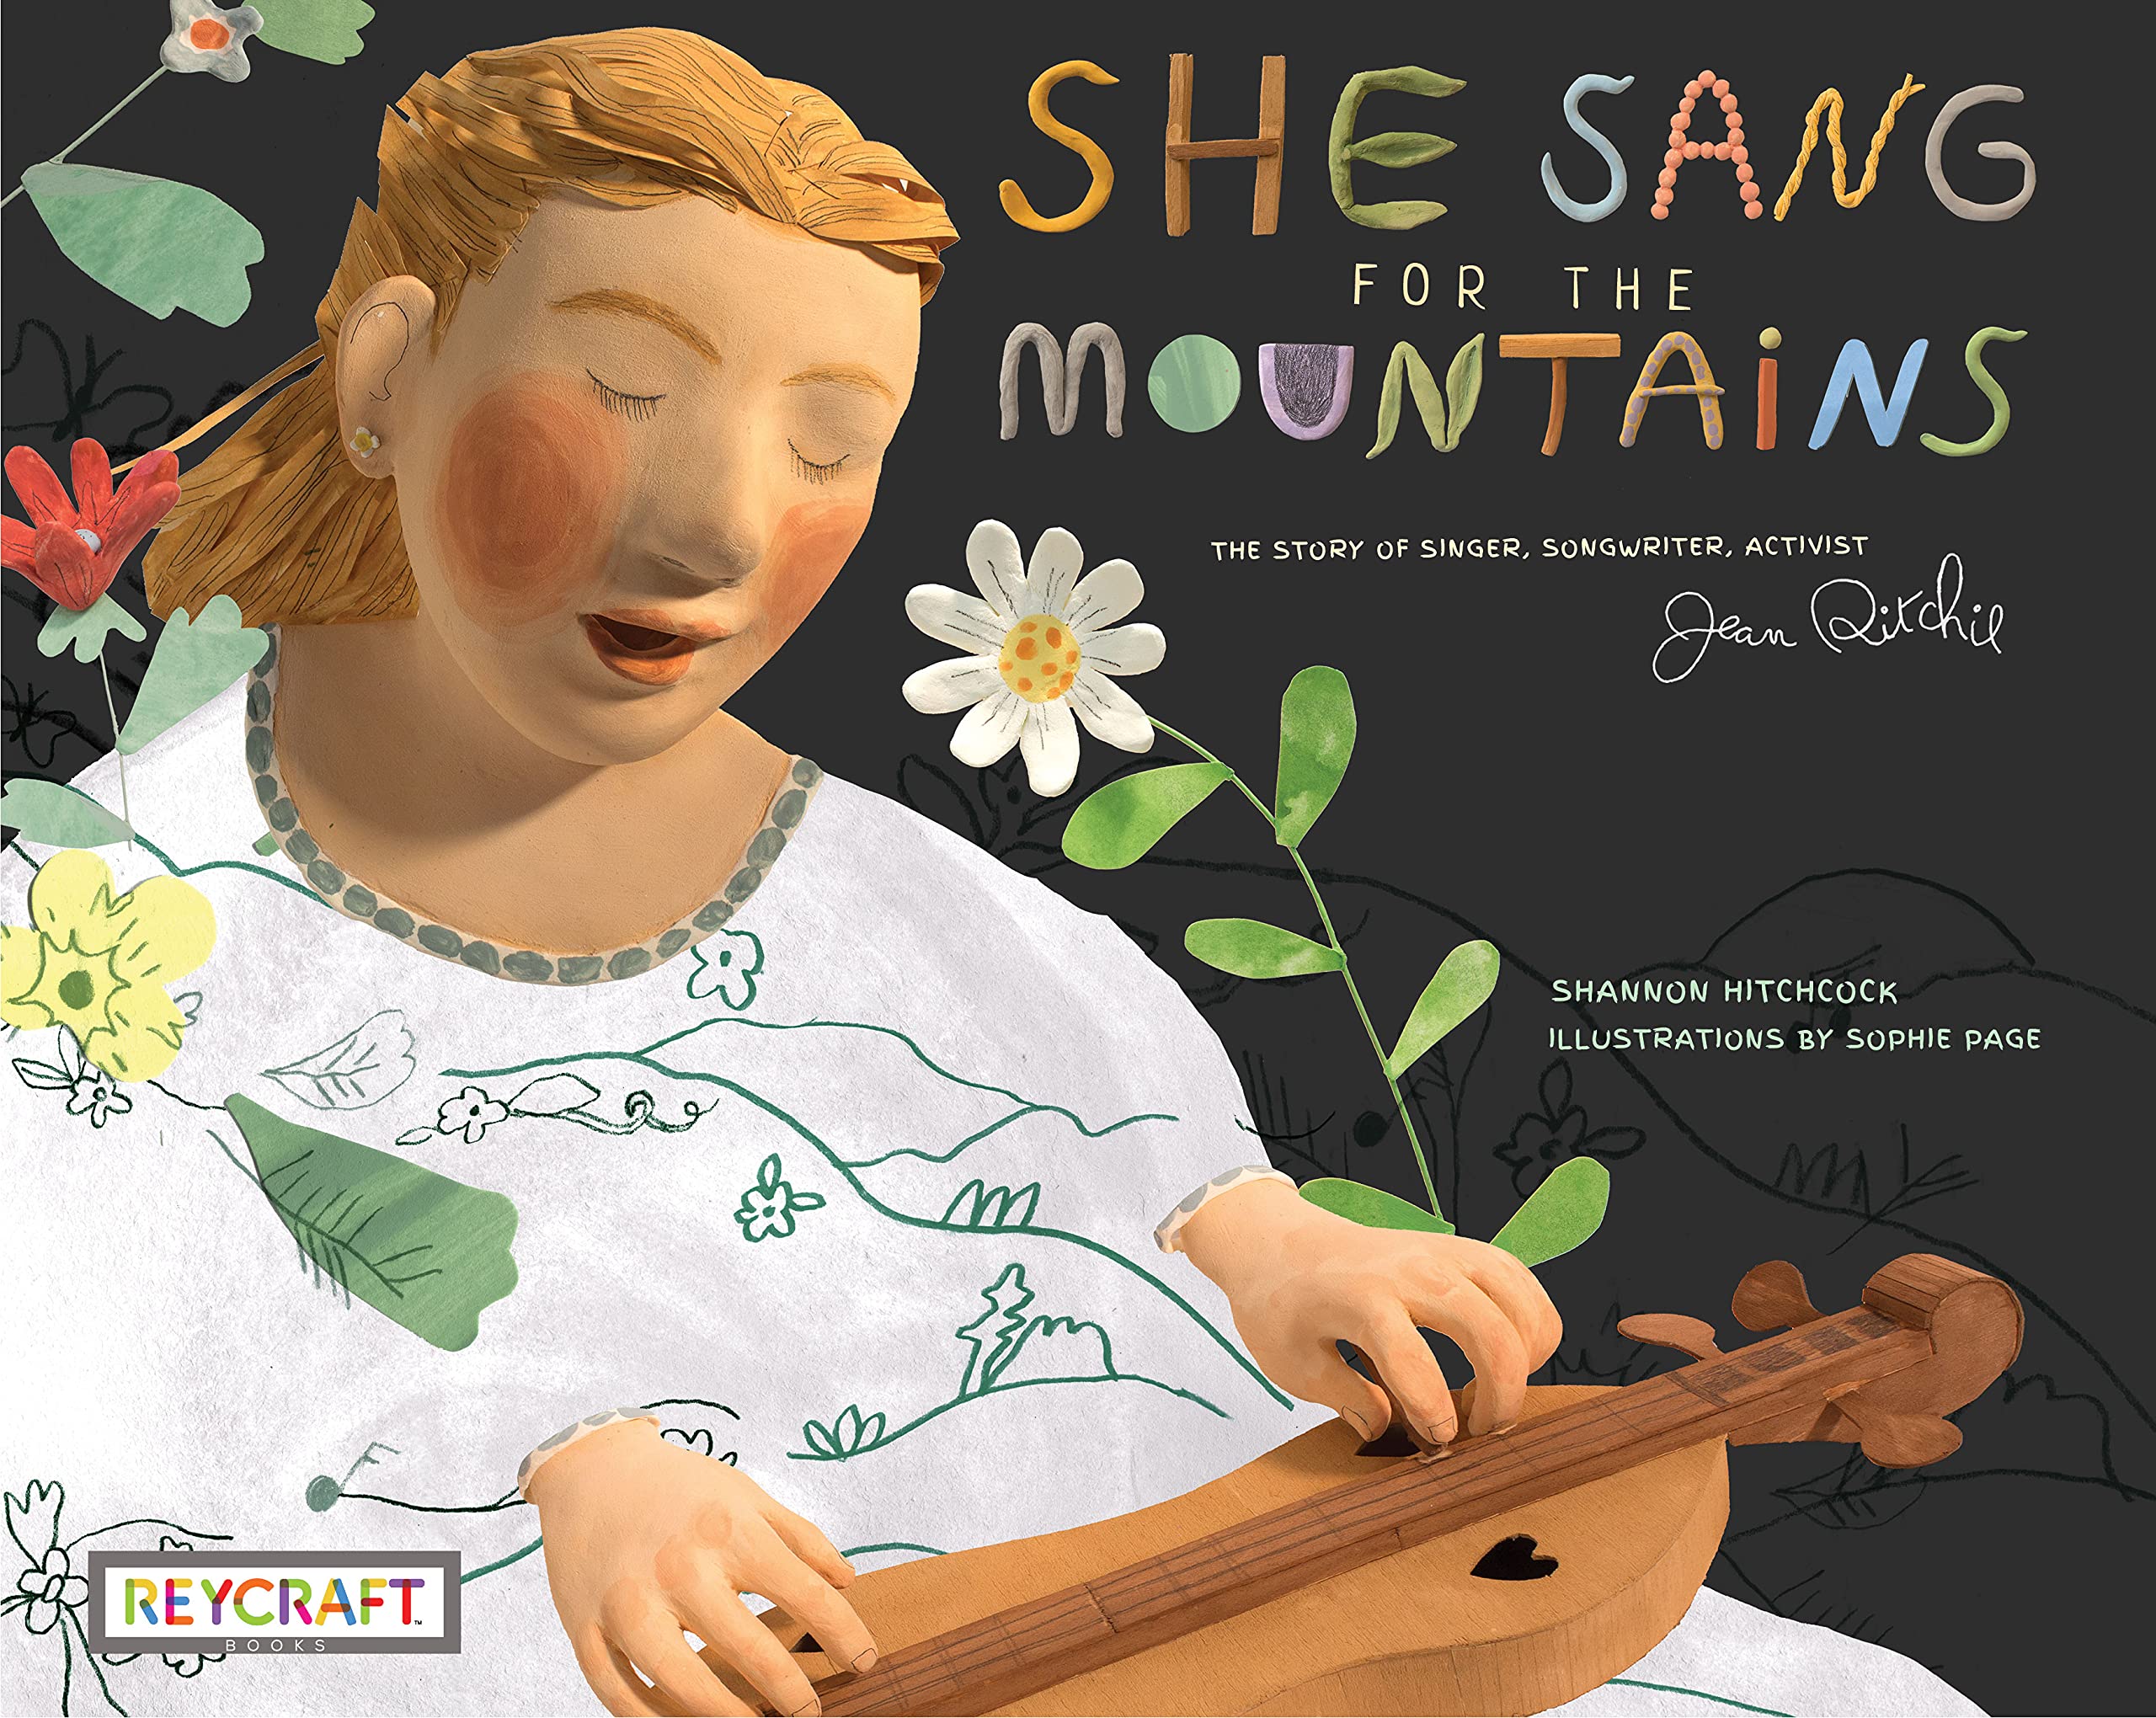 She Sang for the Mountains: The Story of Singer, Songwriter, Activist Jean Ritchie